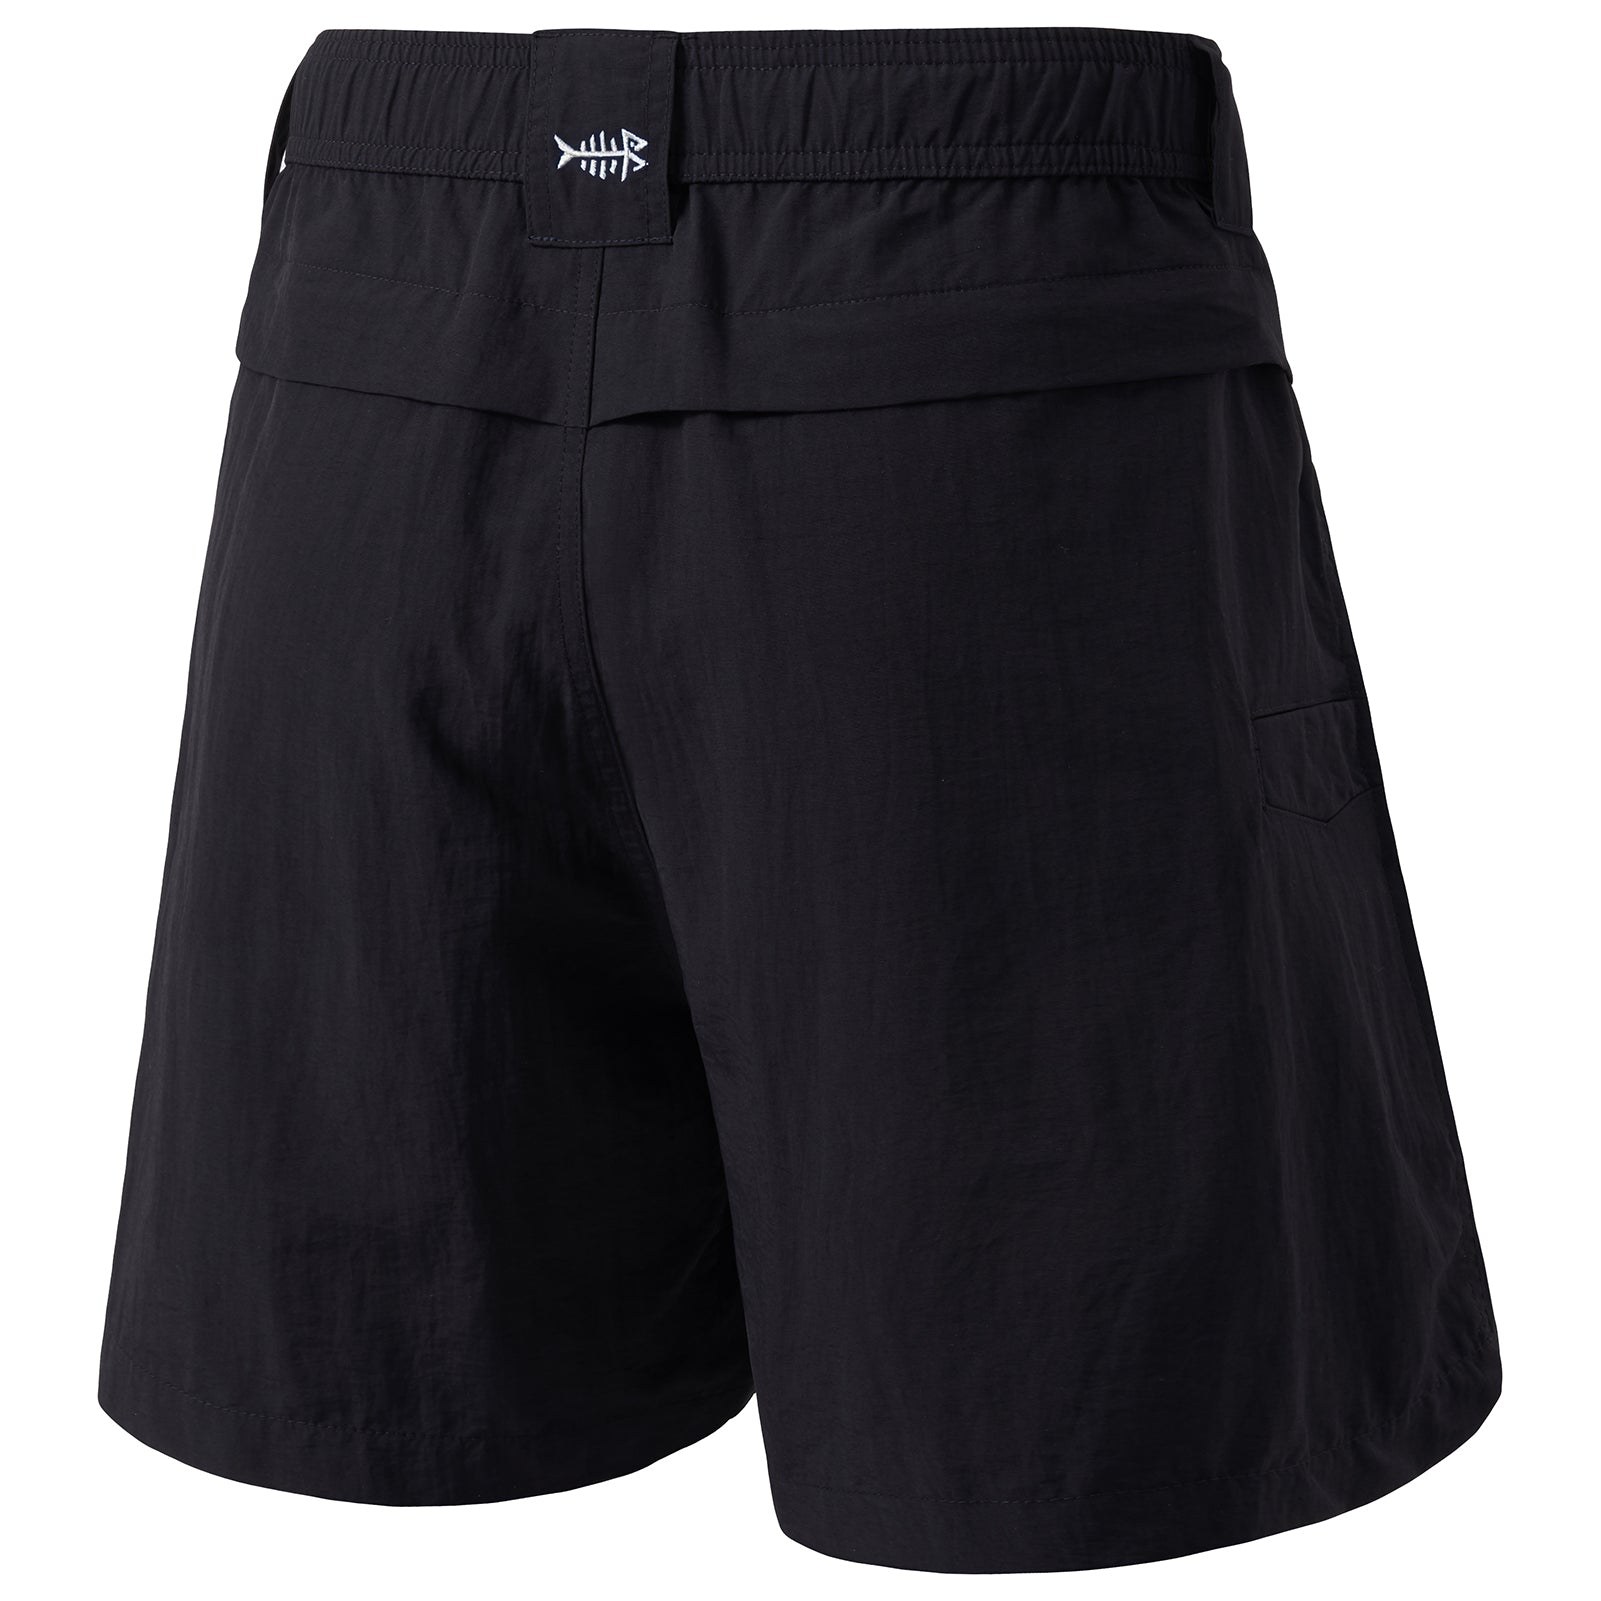 DILIBA Mens & Womens Fishing Shorts Quick Dry Lightweight Dry-Fit